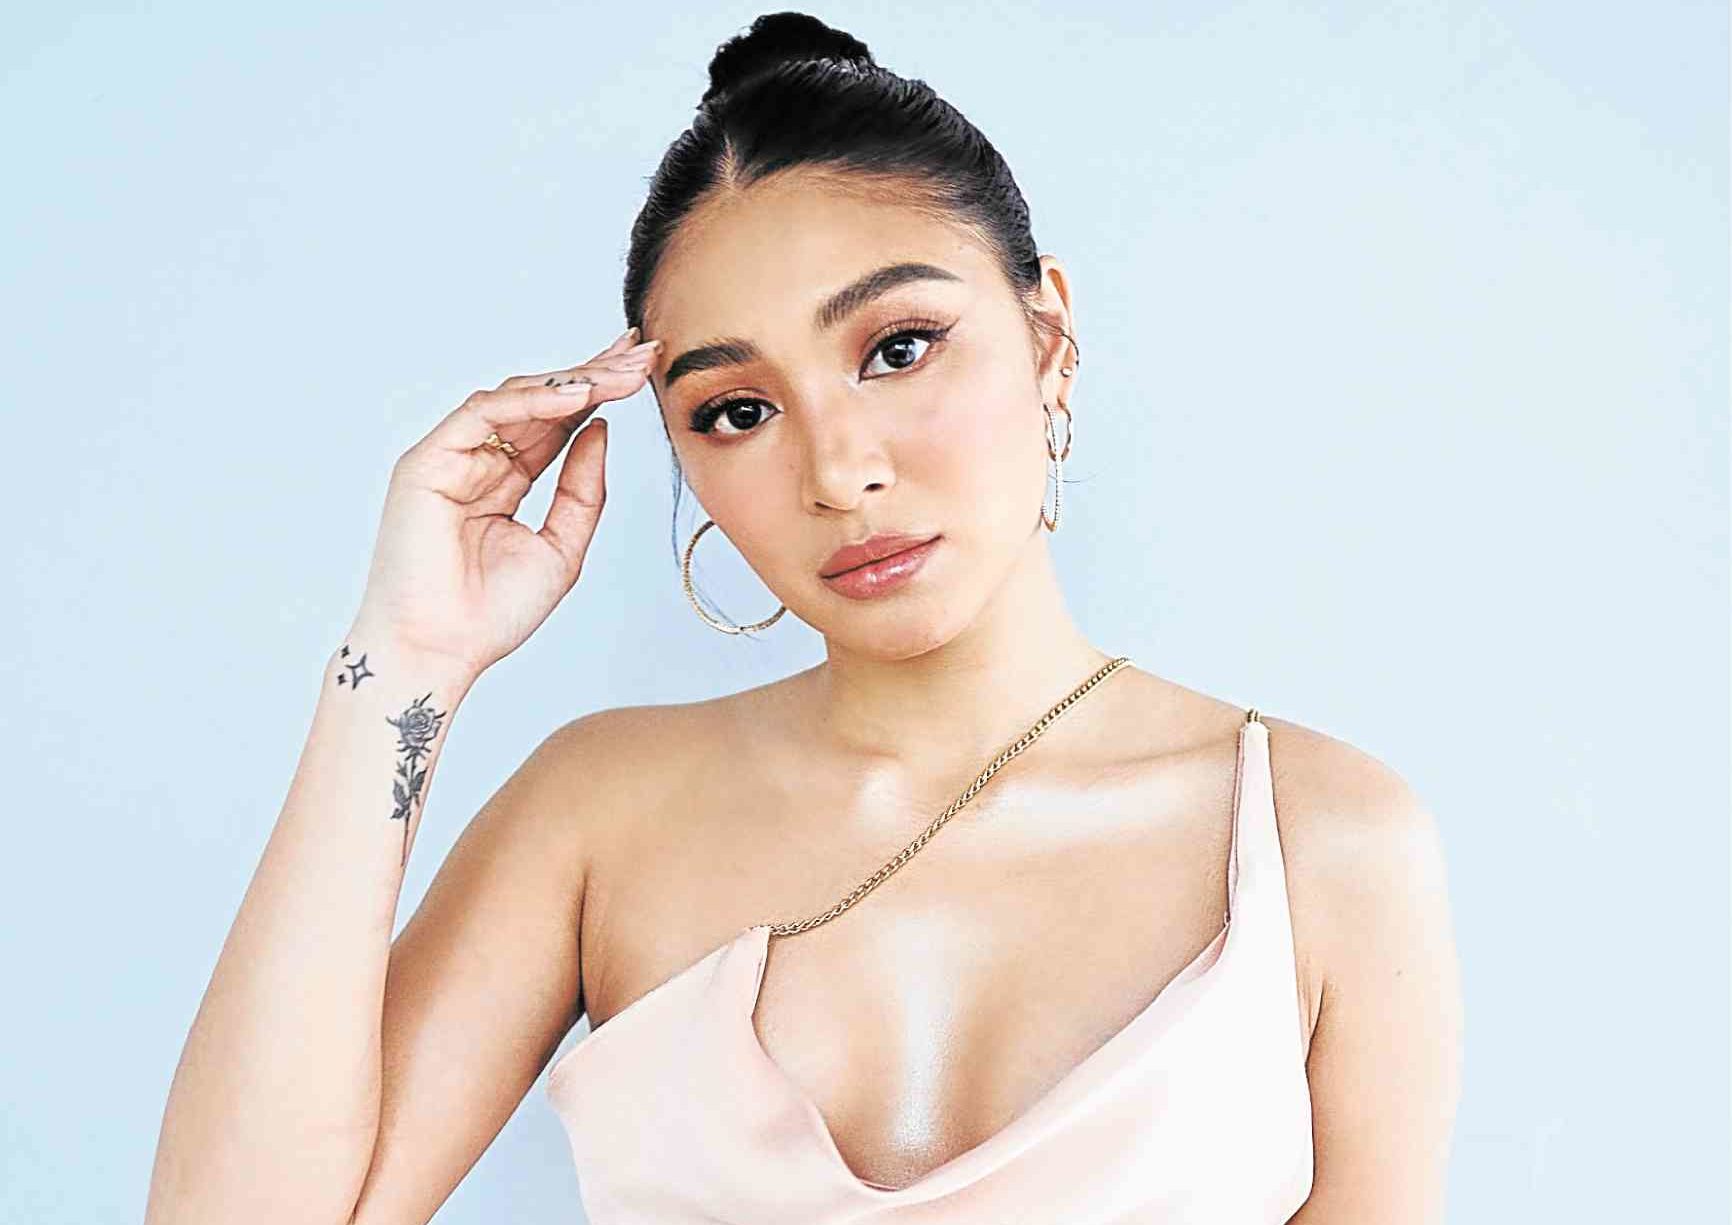 Nadine Lustre bares what aspect of her appearance gives her insecurities